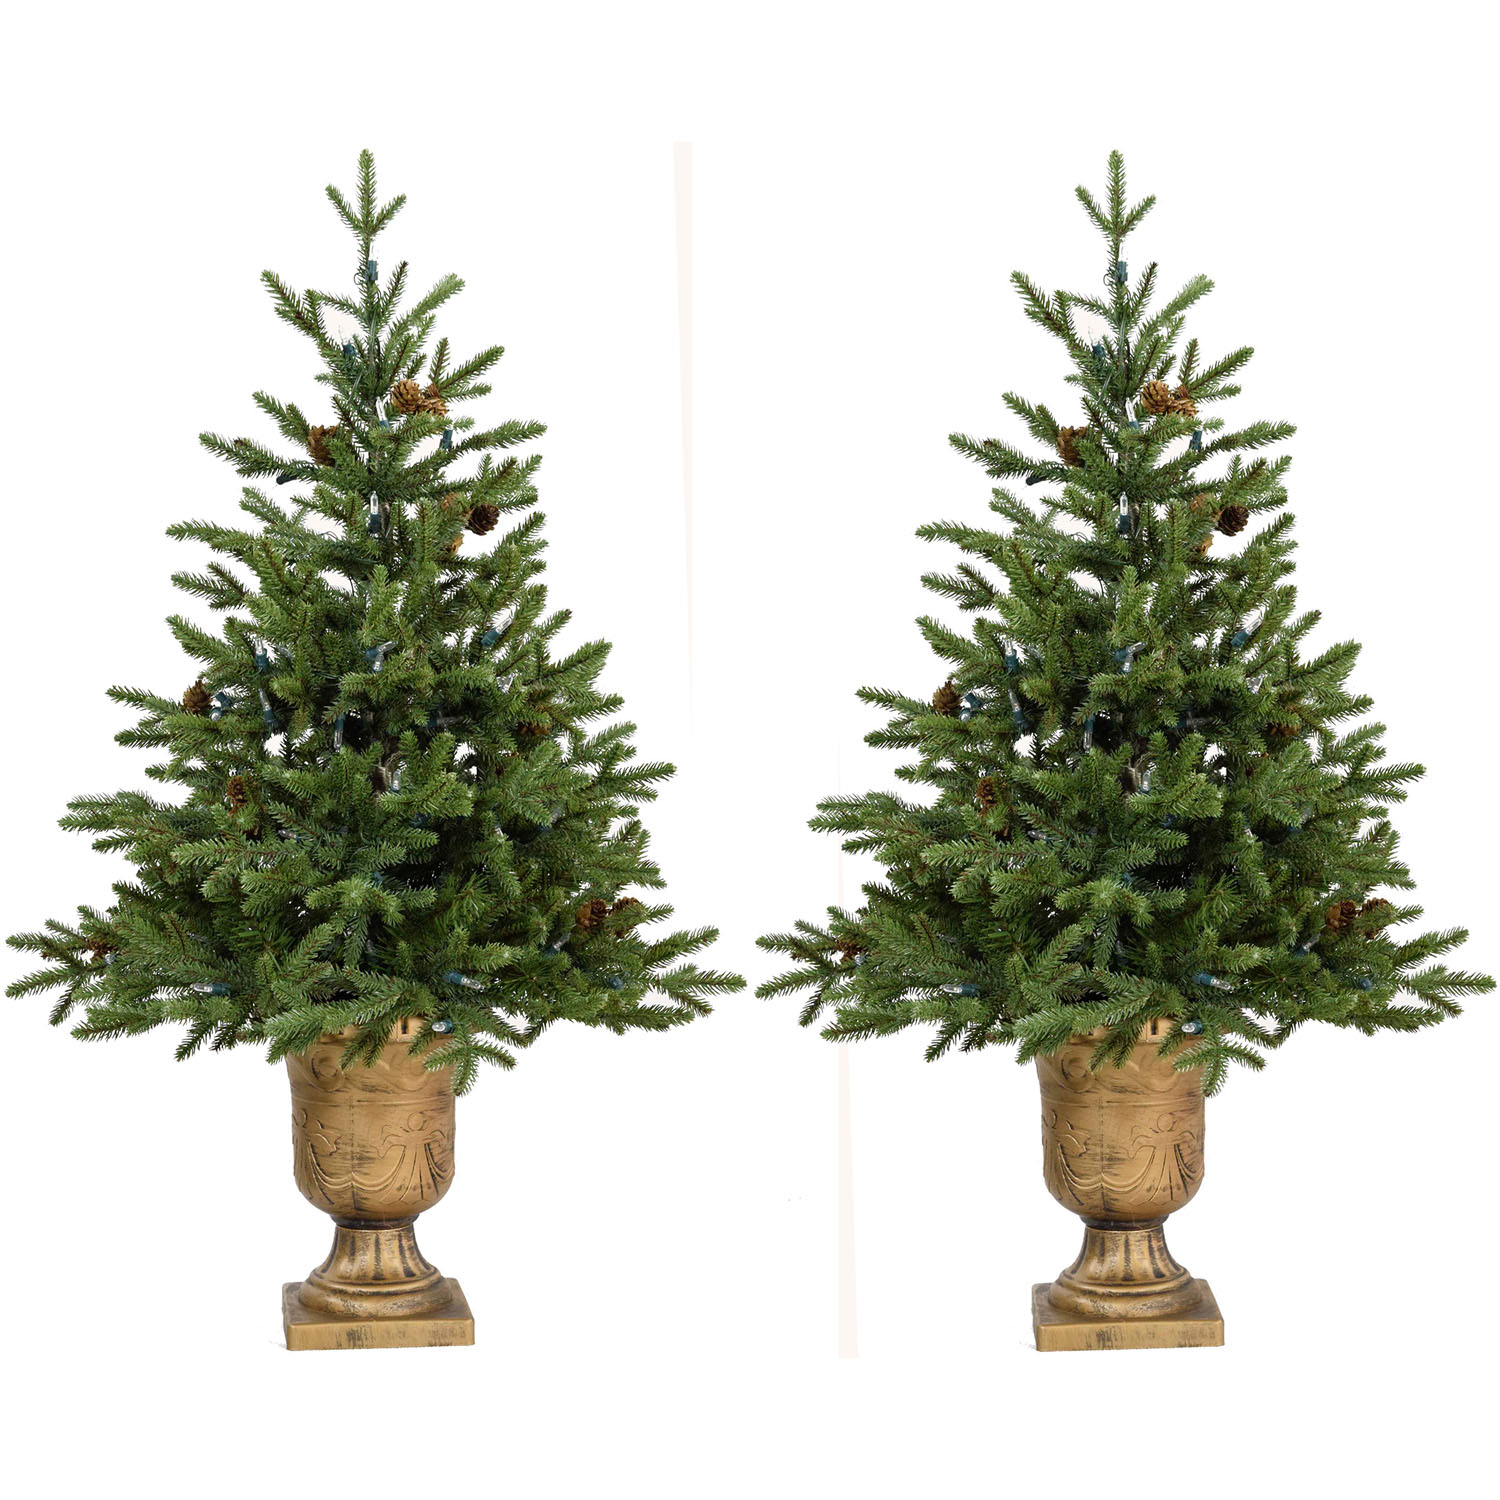 Fraser Hill Farm Set of Two 4-Ft. Noble Fir Artificial Trees with Metallic Urn Bases - image 1 of 6